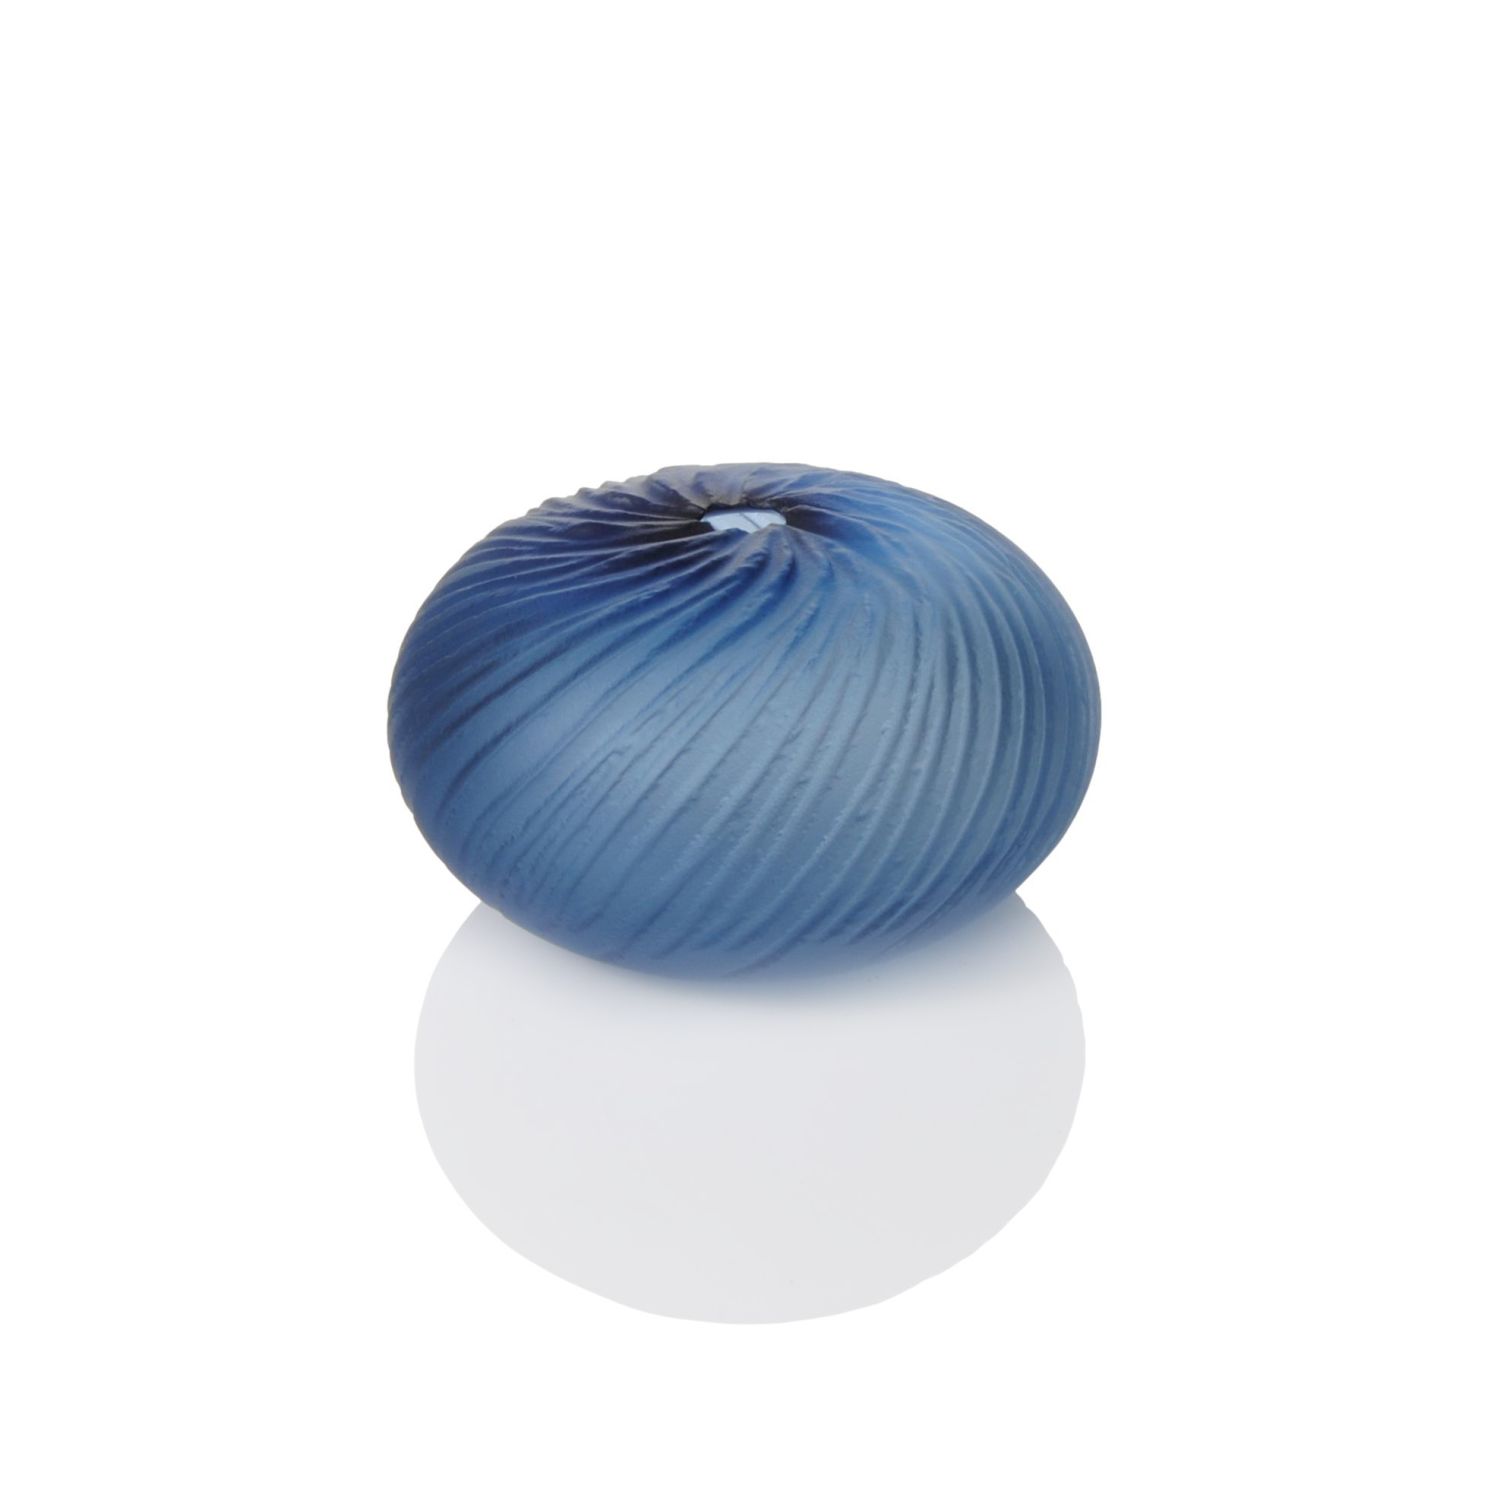 Courtney Downman: Steel Blue Saw Carved Glass Wave Bowl Product Image 1 of 1